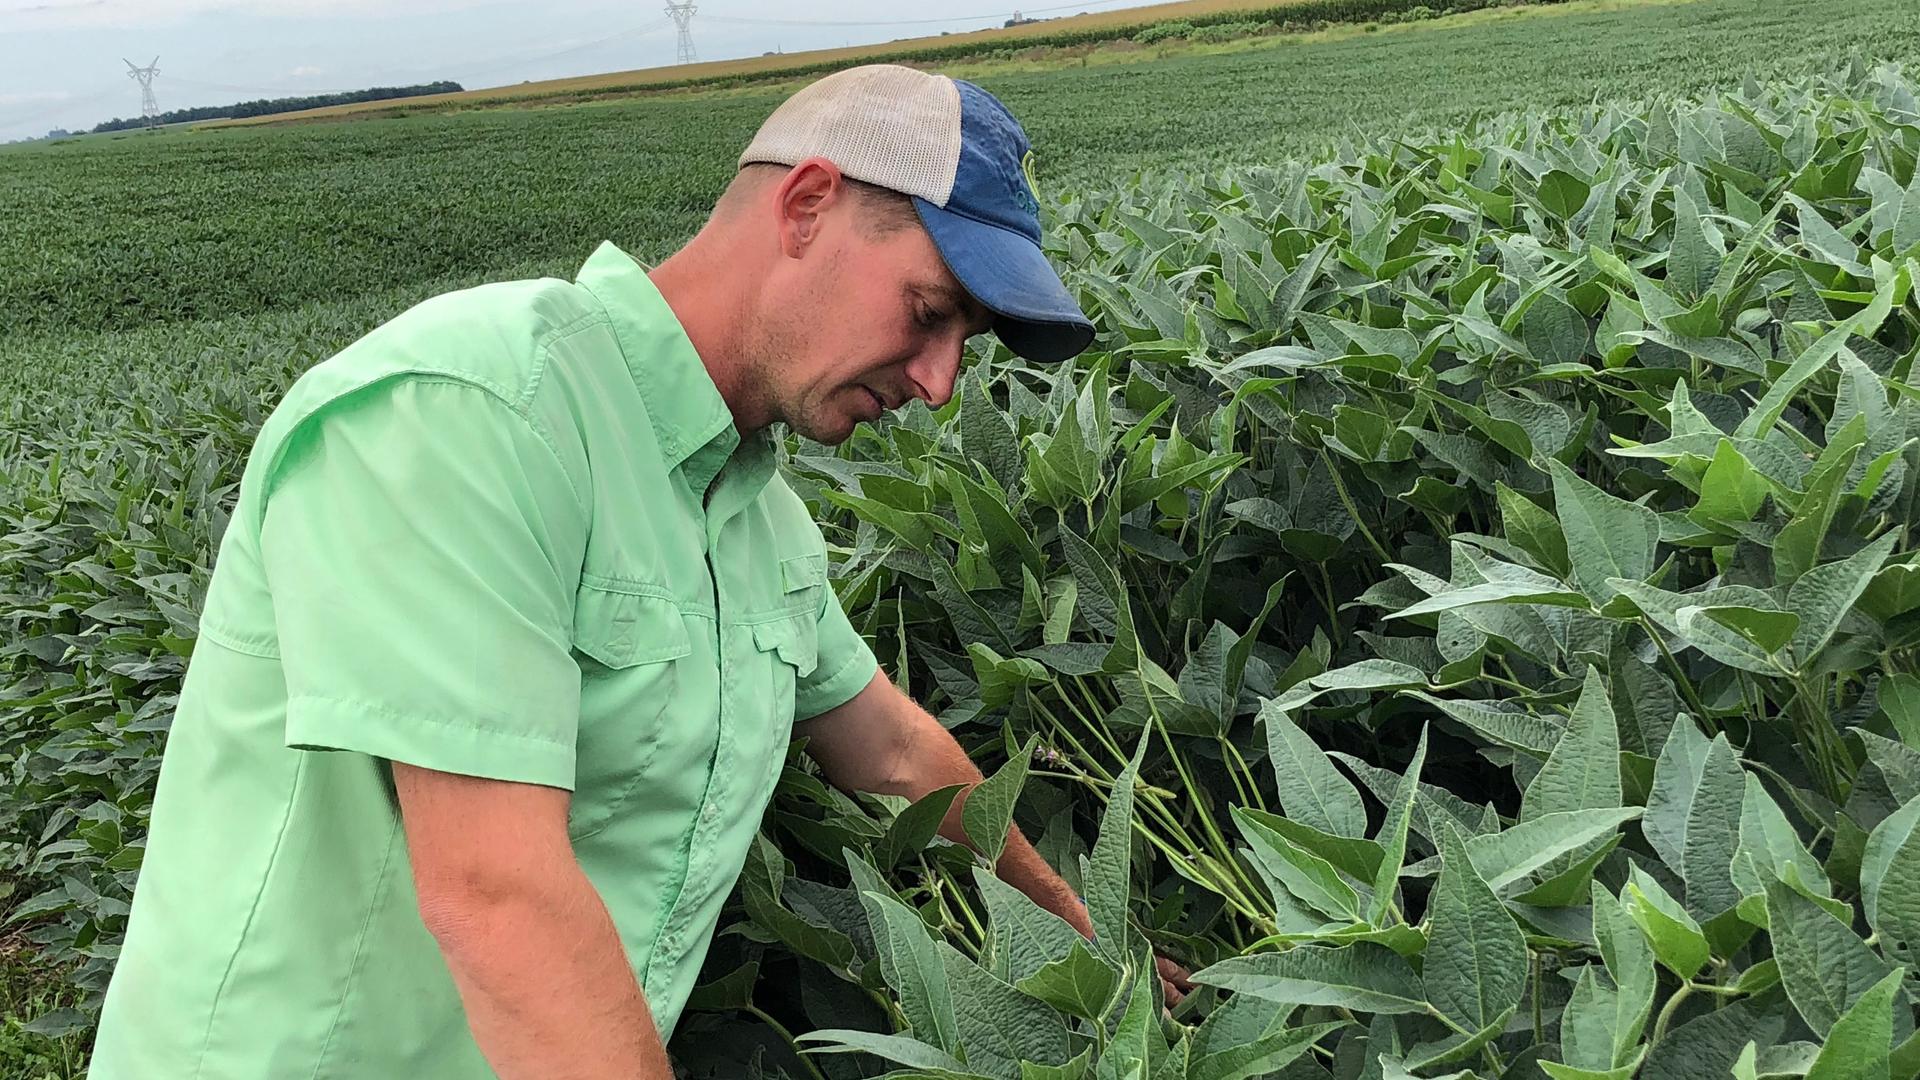 Soy farmers like Phil Sidles have seen prices for their soybeans fall sharply — down around 20 percent since May, not long after China announced retaliatory tariffs on American soybeans.